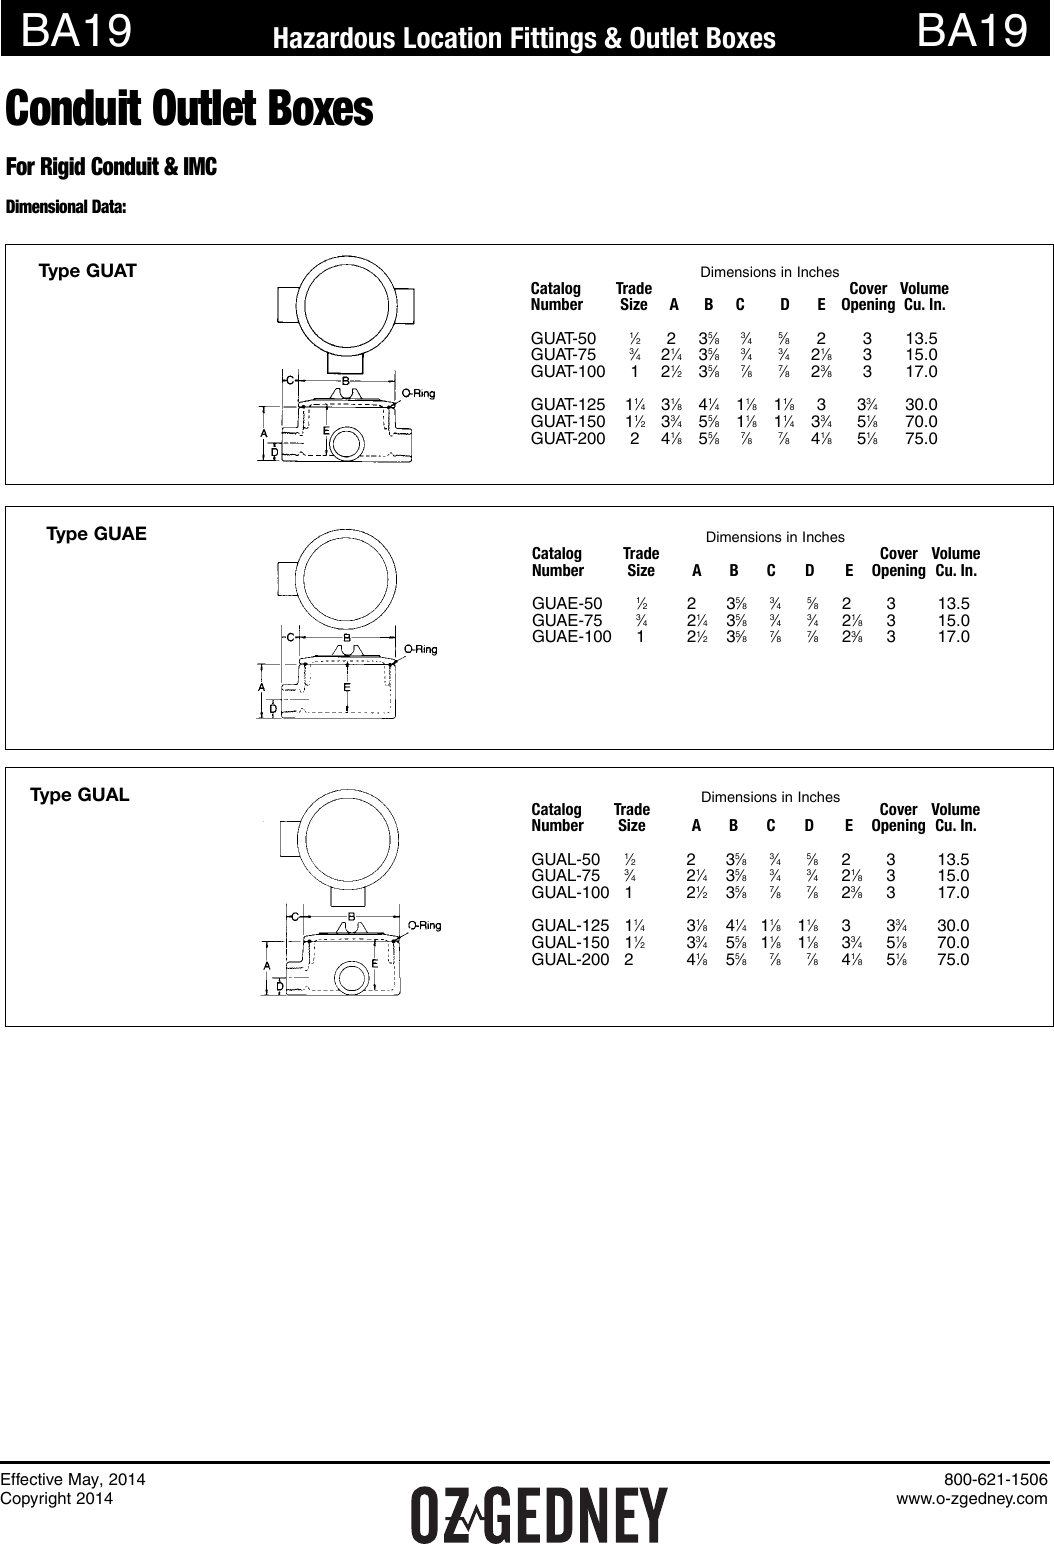 Page 2 of 7 - Type GUA Conduit Outlet Boxes Catalog Pages May 2014